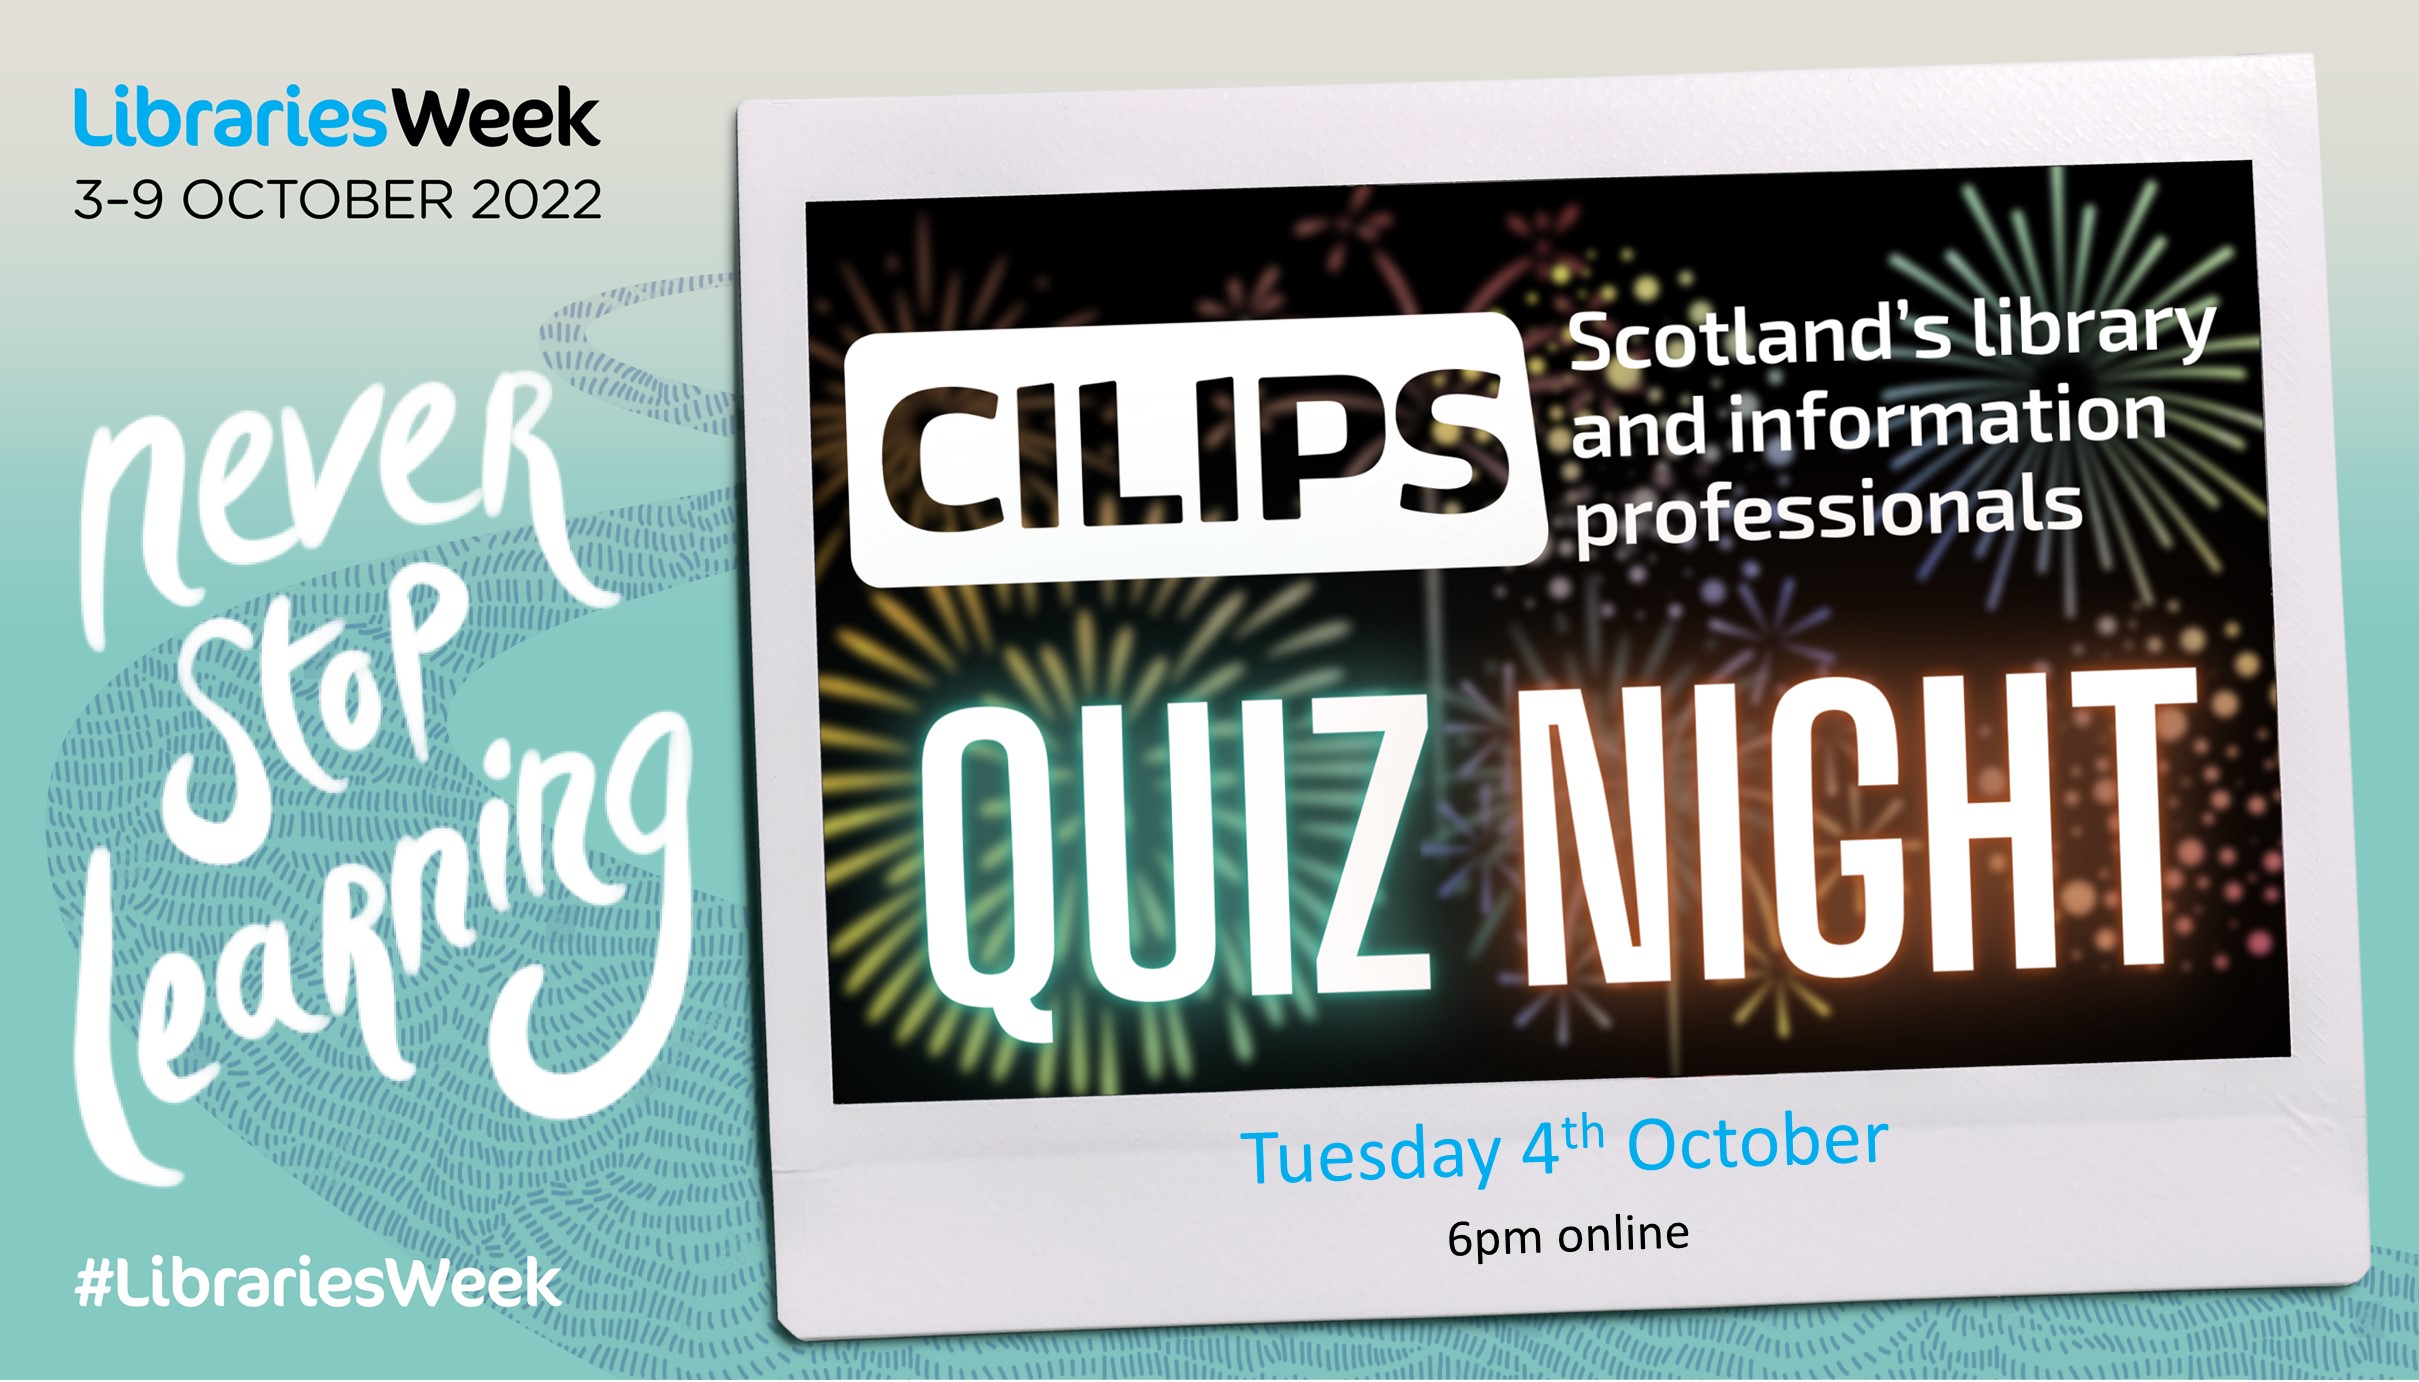 The CILIPS Libraries Week Quiz Night logo, with fluorescent letters and text reading Tuesday 4th October, 6pm, online inside the Libraries Week 'Never stop learning' frame.